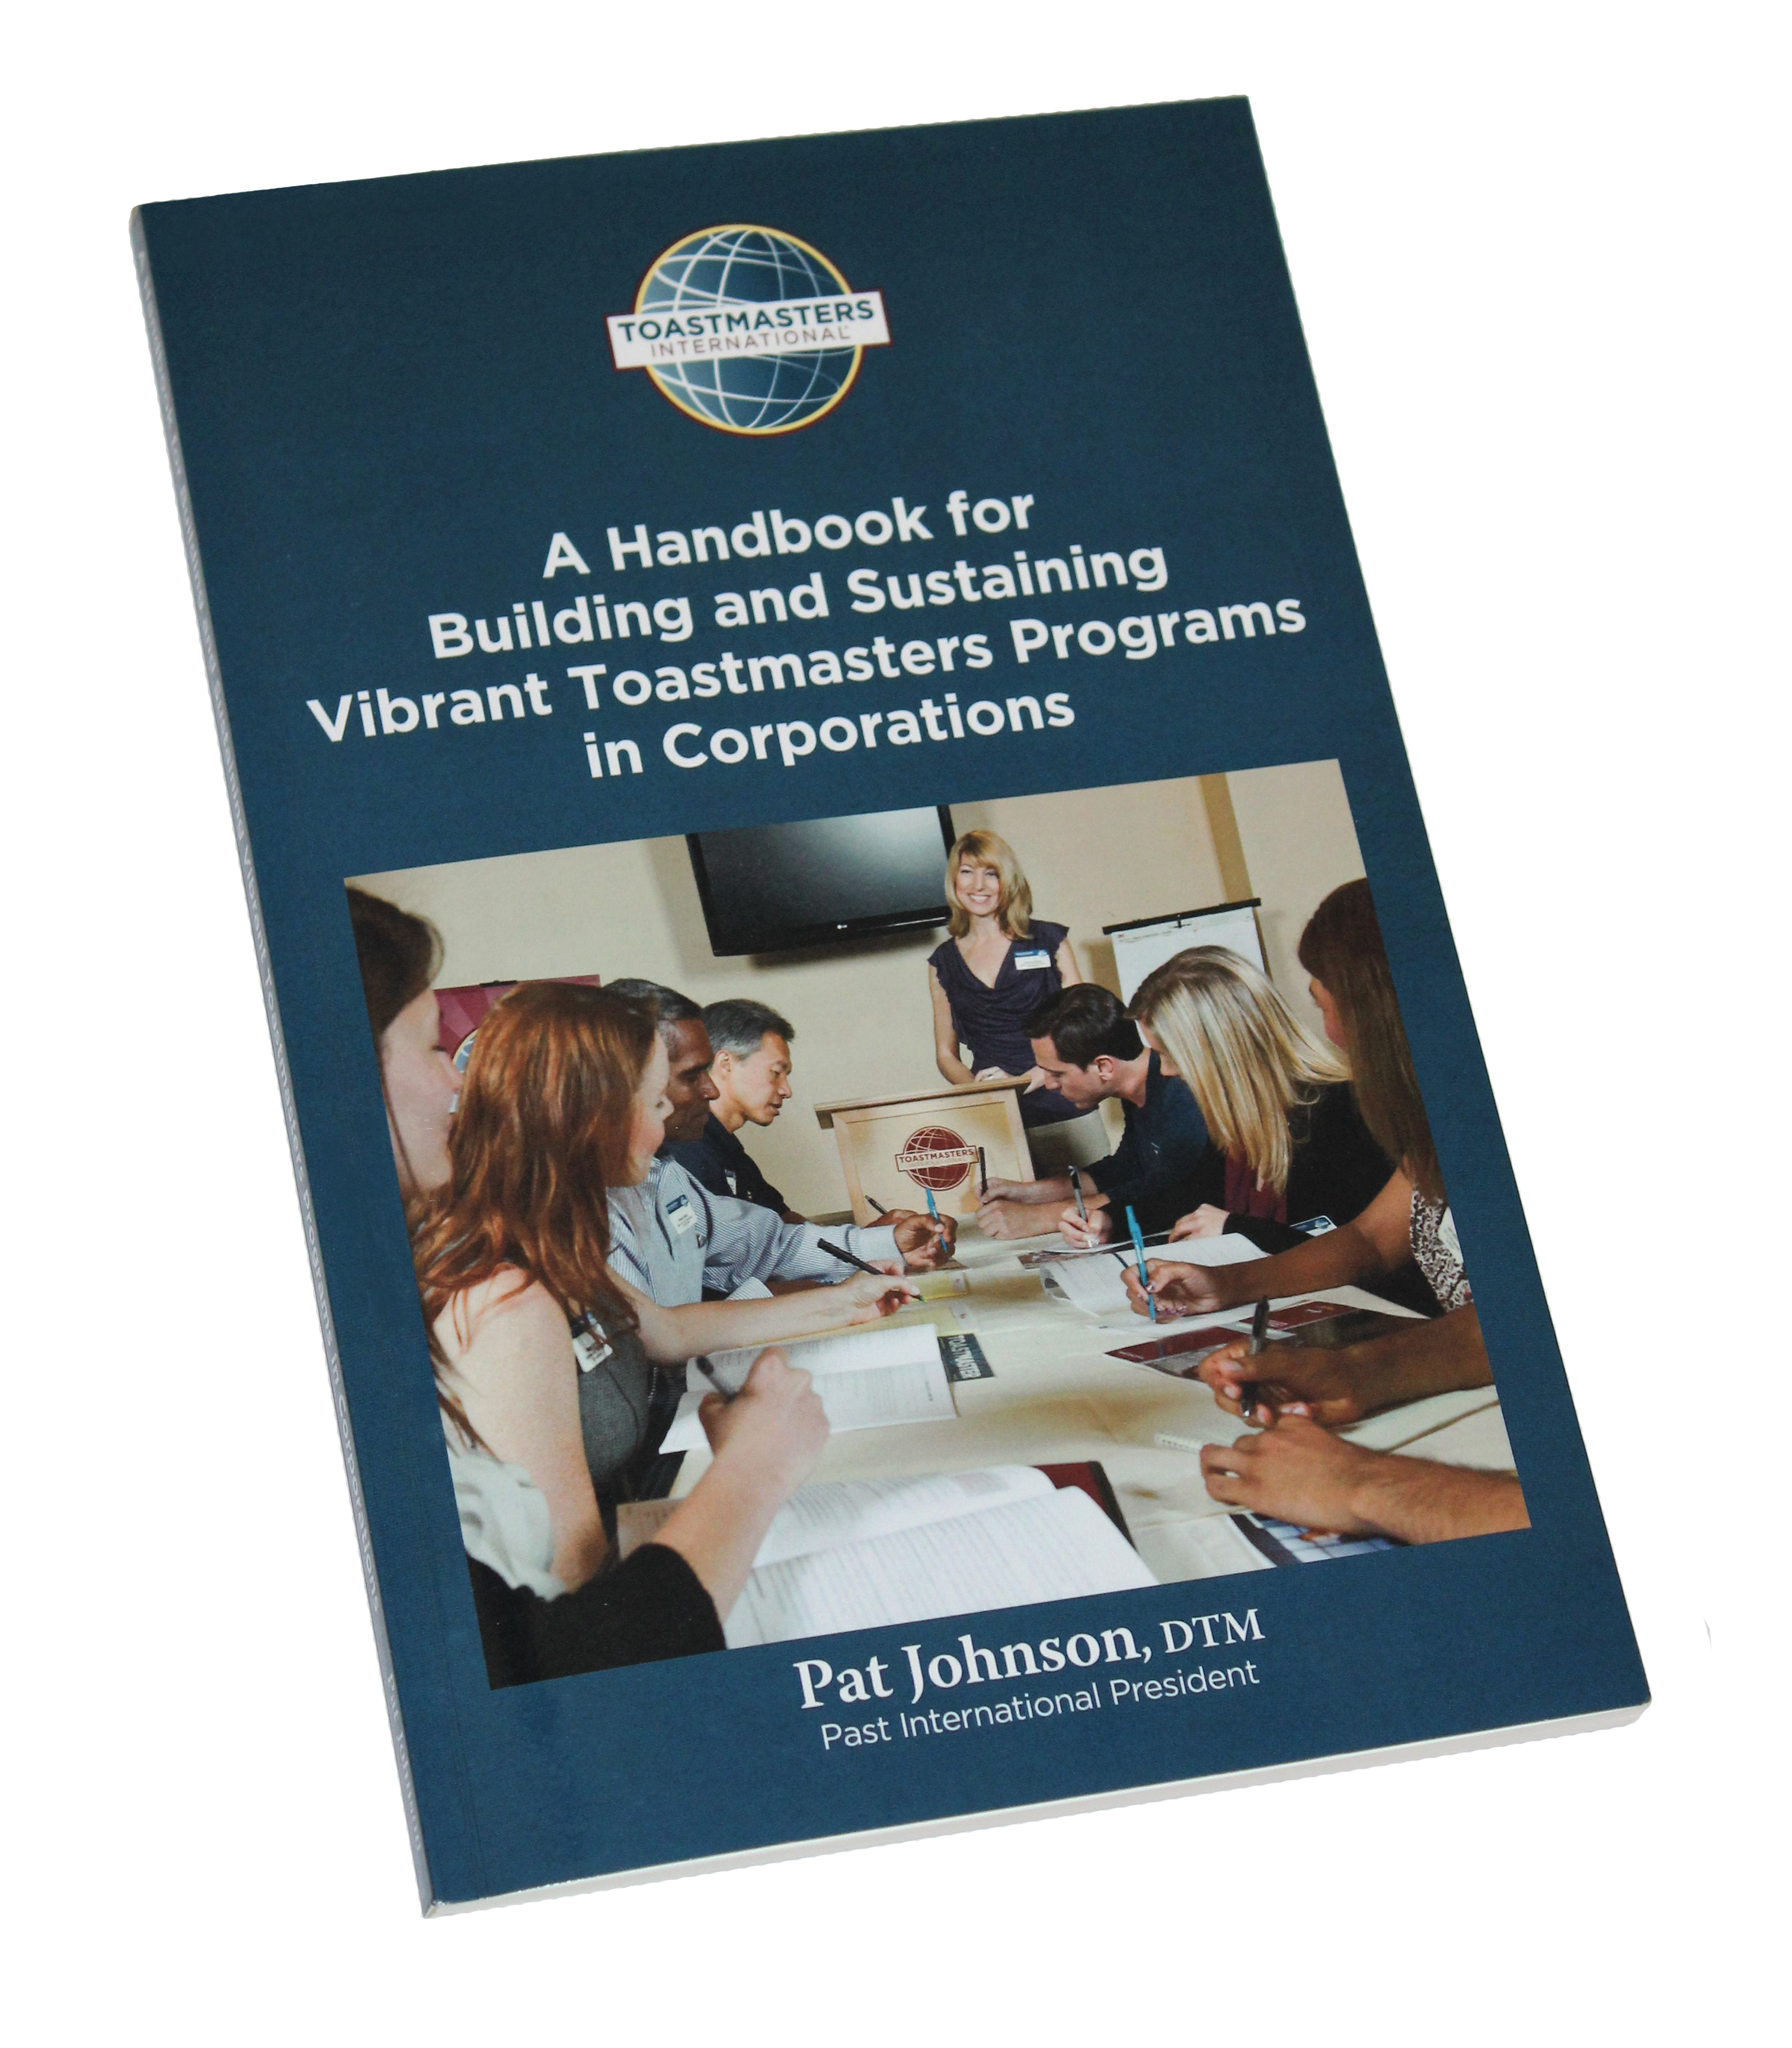 A Handbook for Building and Sustaining Vibrant Toastmaster Programs in Corporations